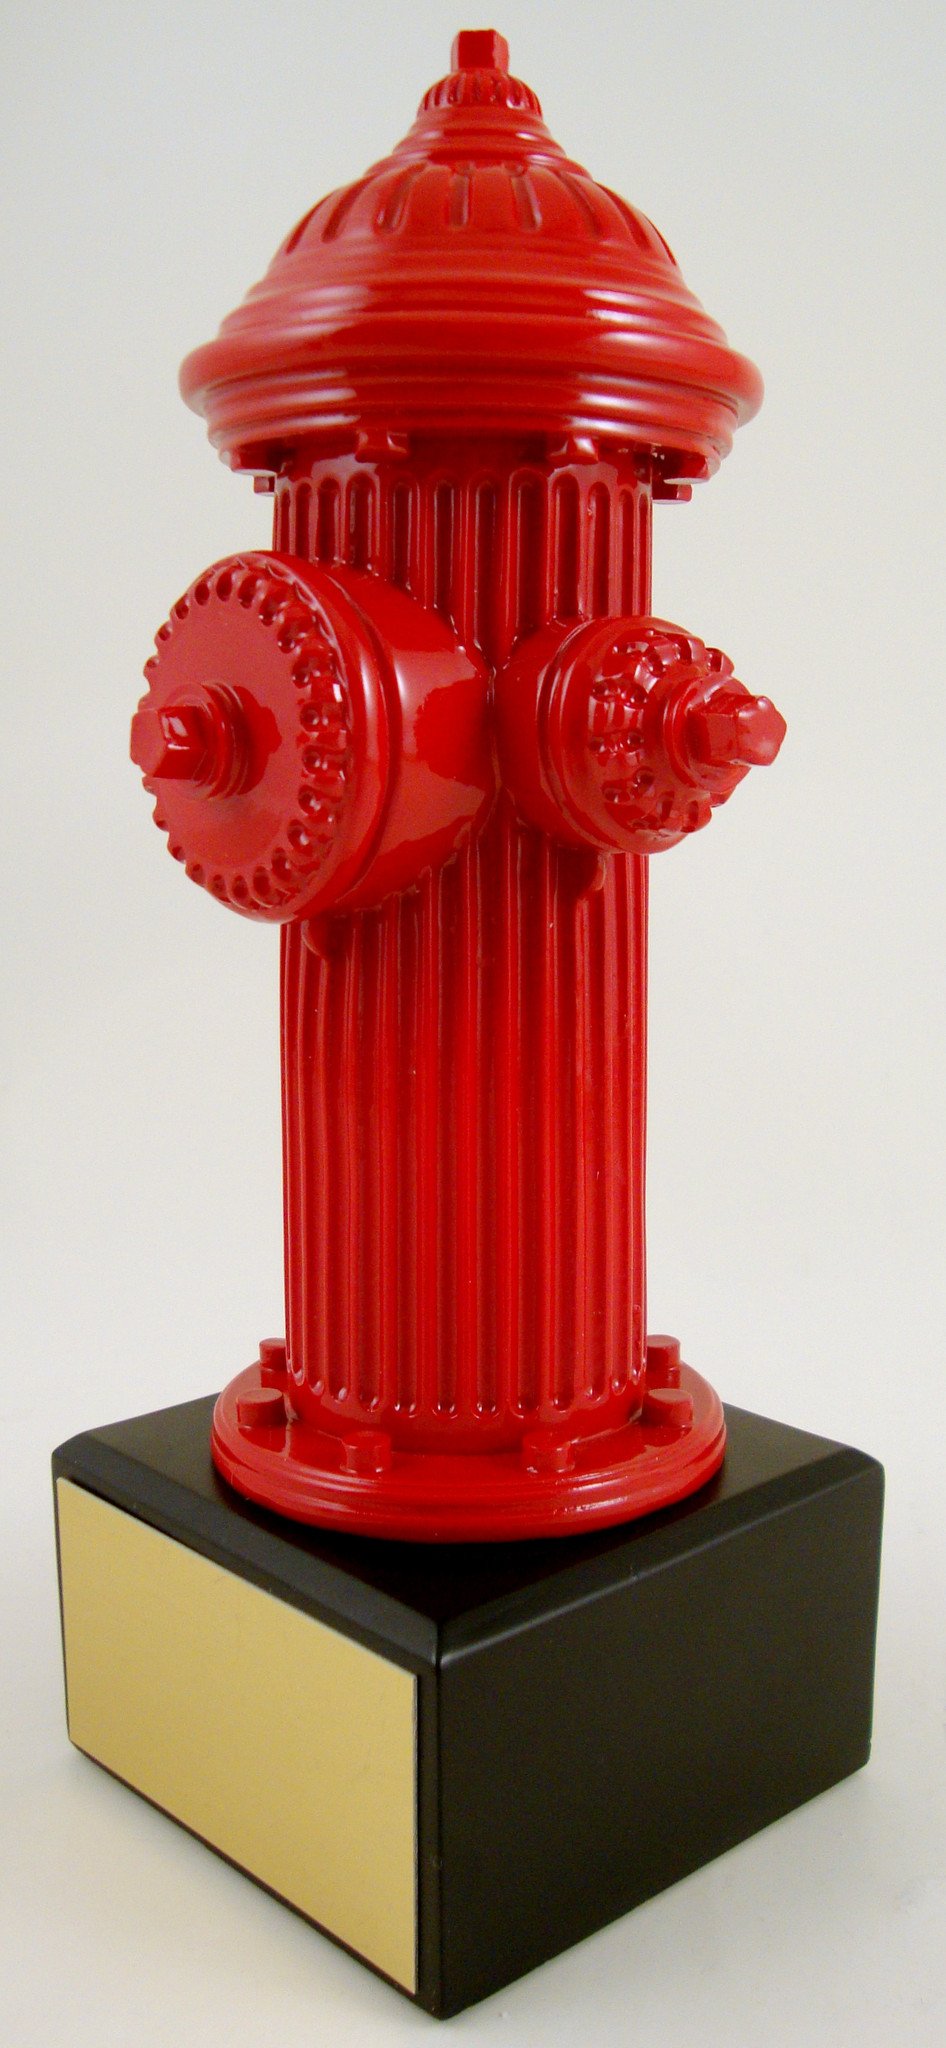 Fire Hydrant Resin On Black Square Base | Schoppy's Since 1921